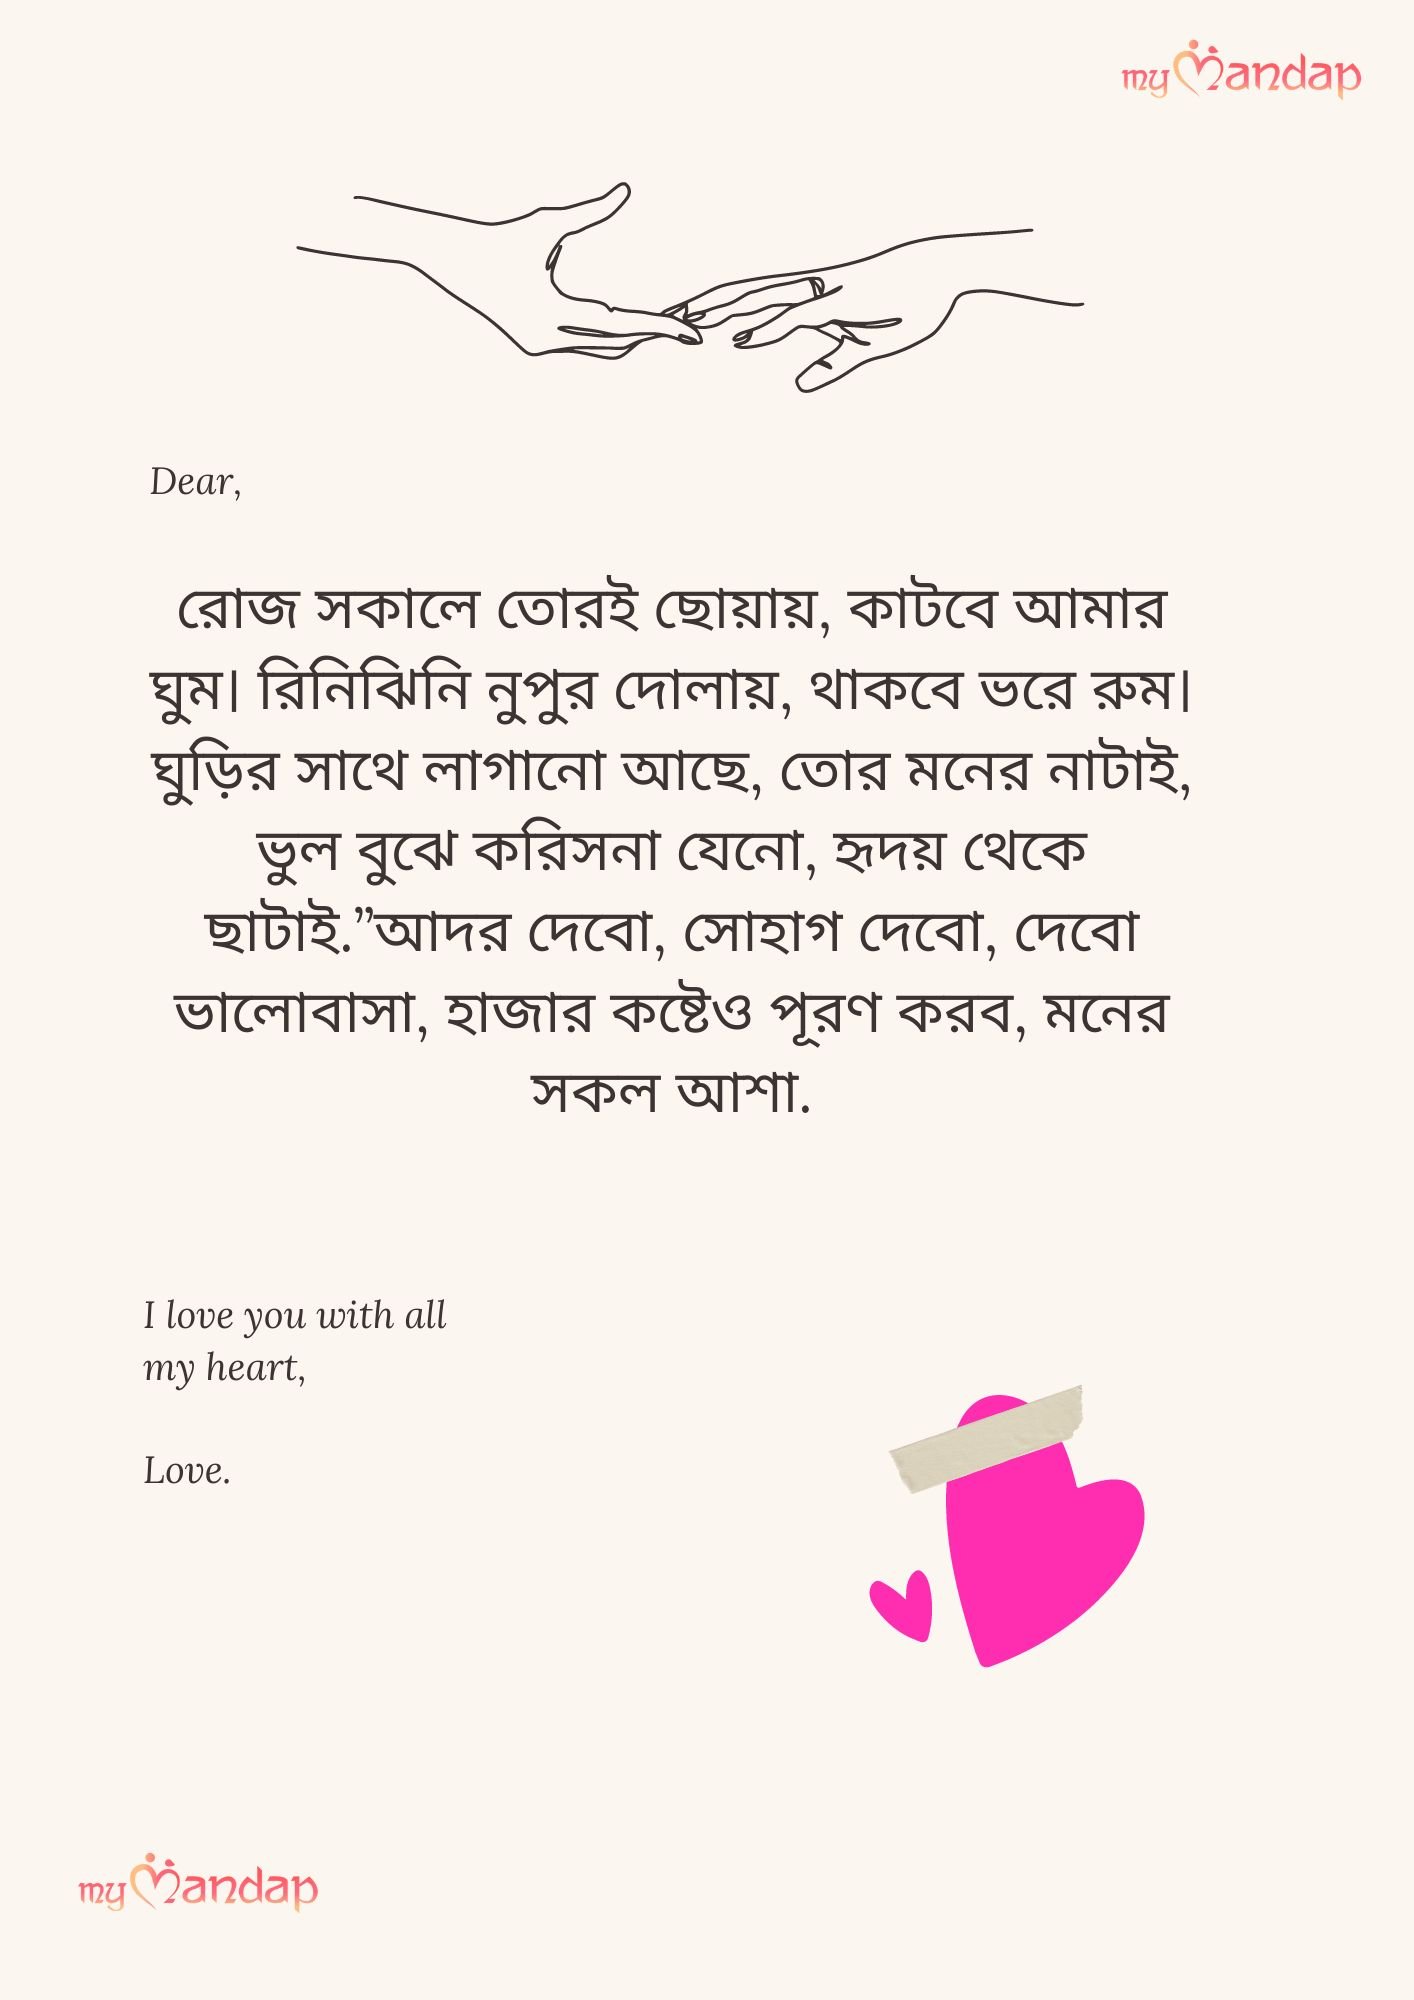 Bengali Love Letter Ideas From The Top 40 Quotes And Messages 0562